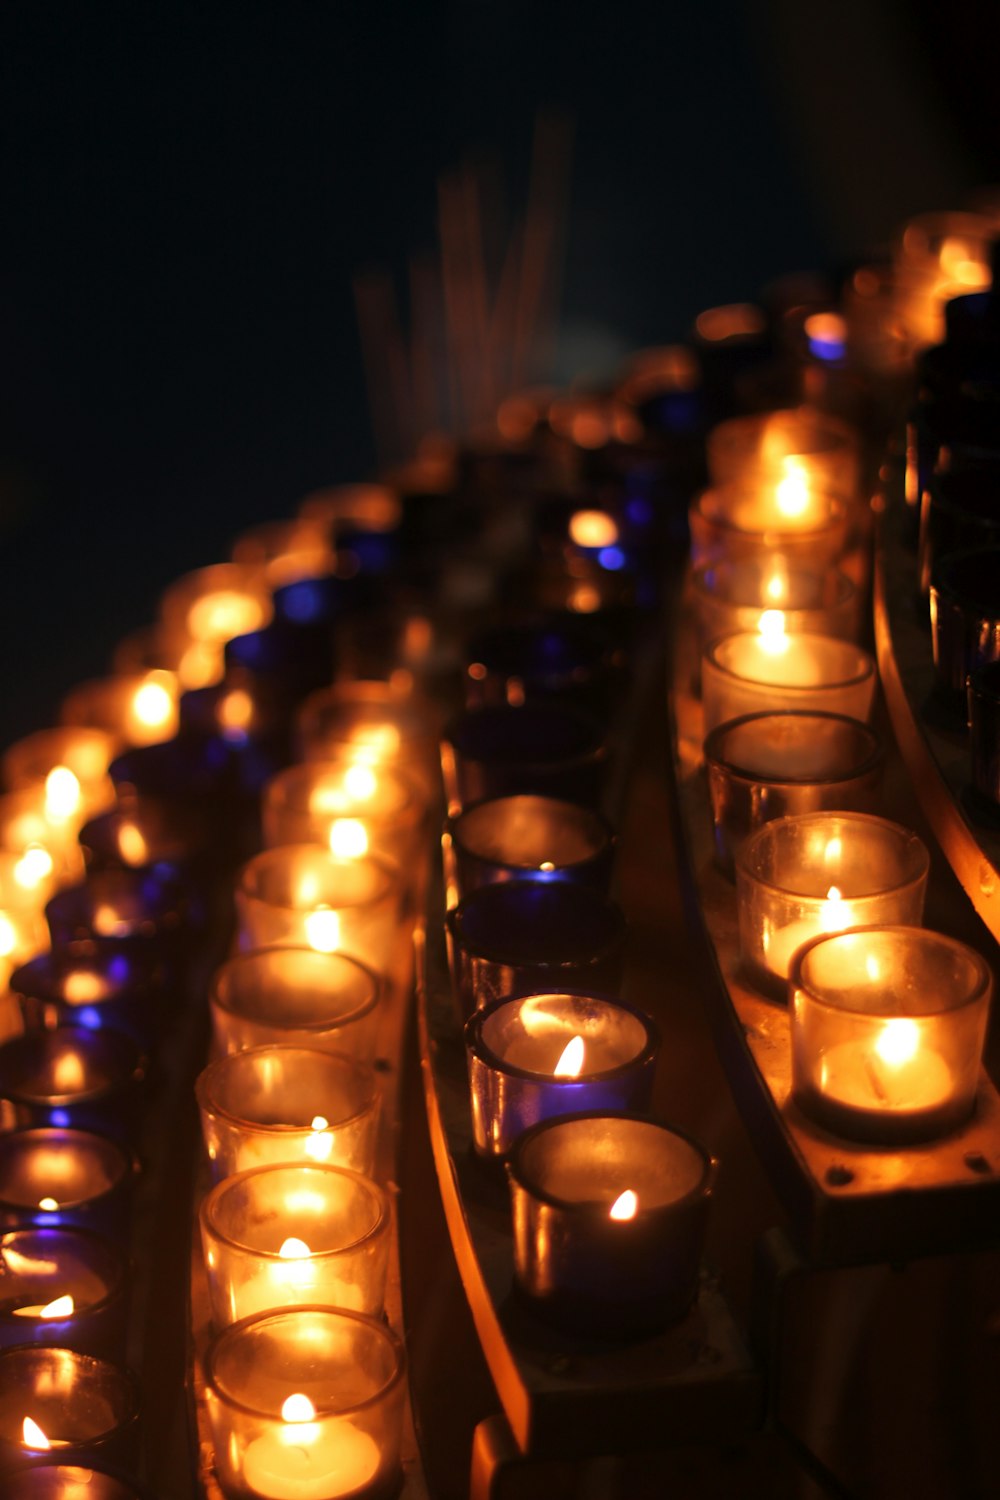 lighted candles on the holder